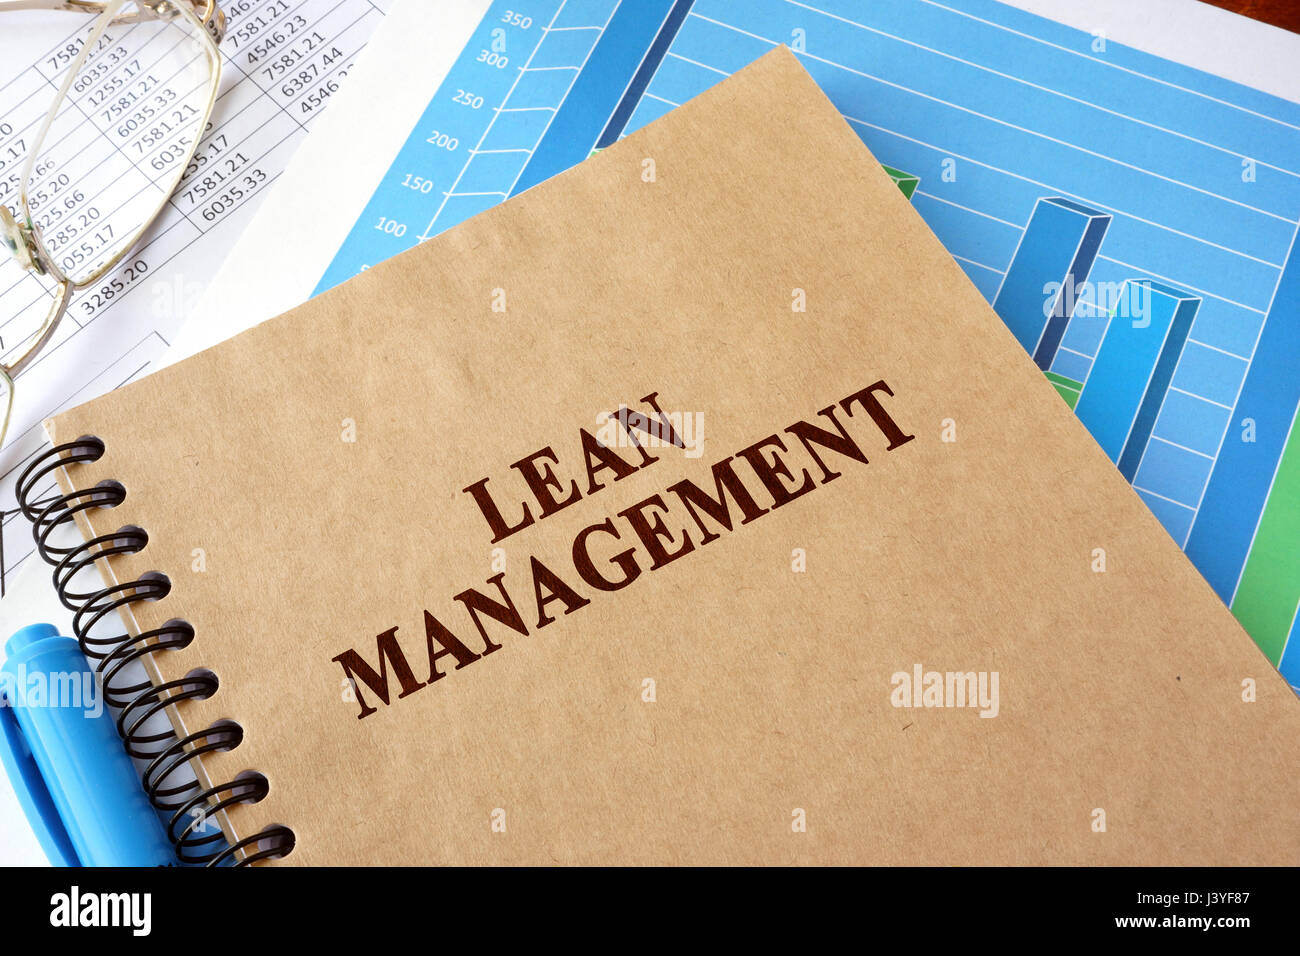 Book with title lean management on a table. Stock Photo